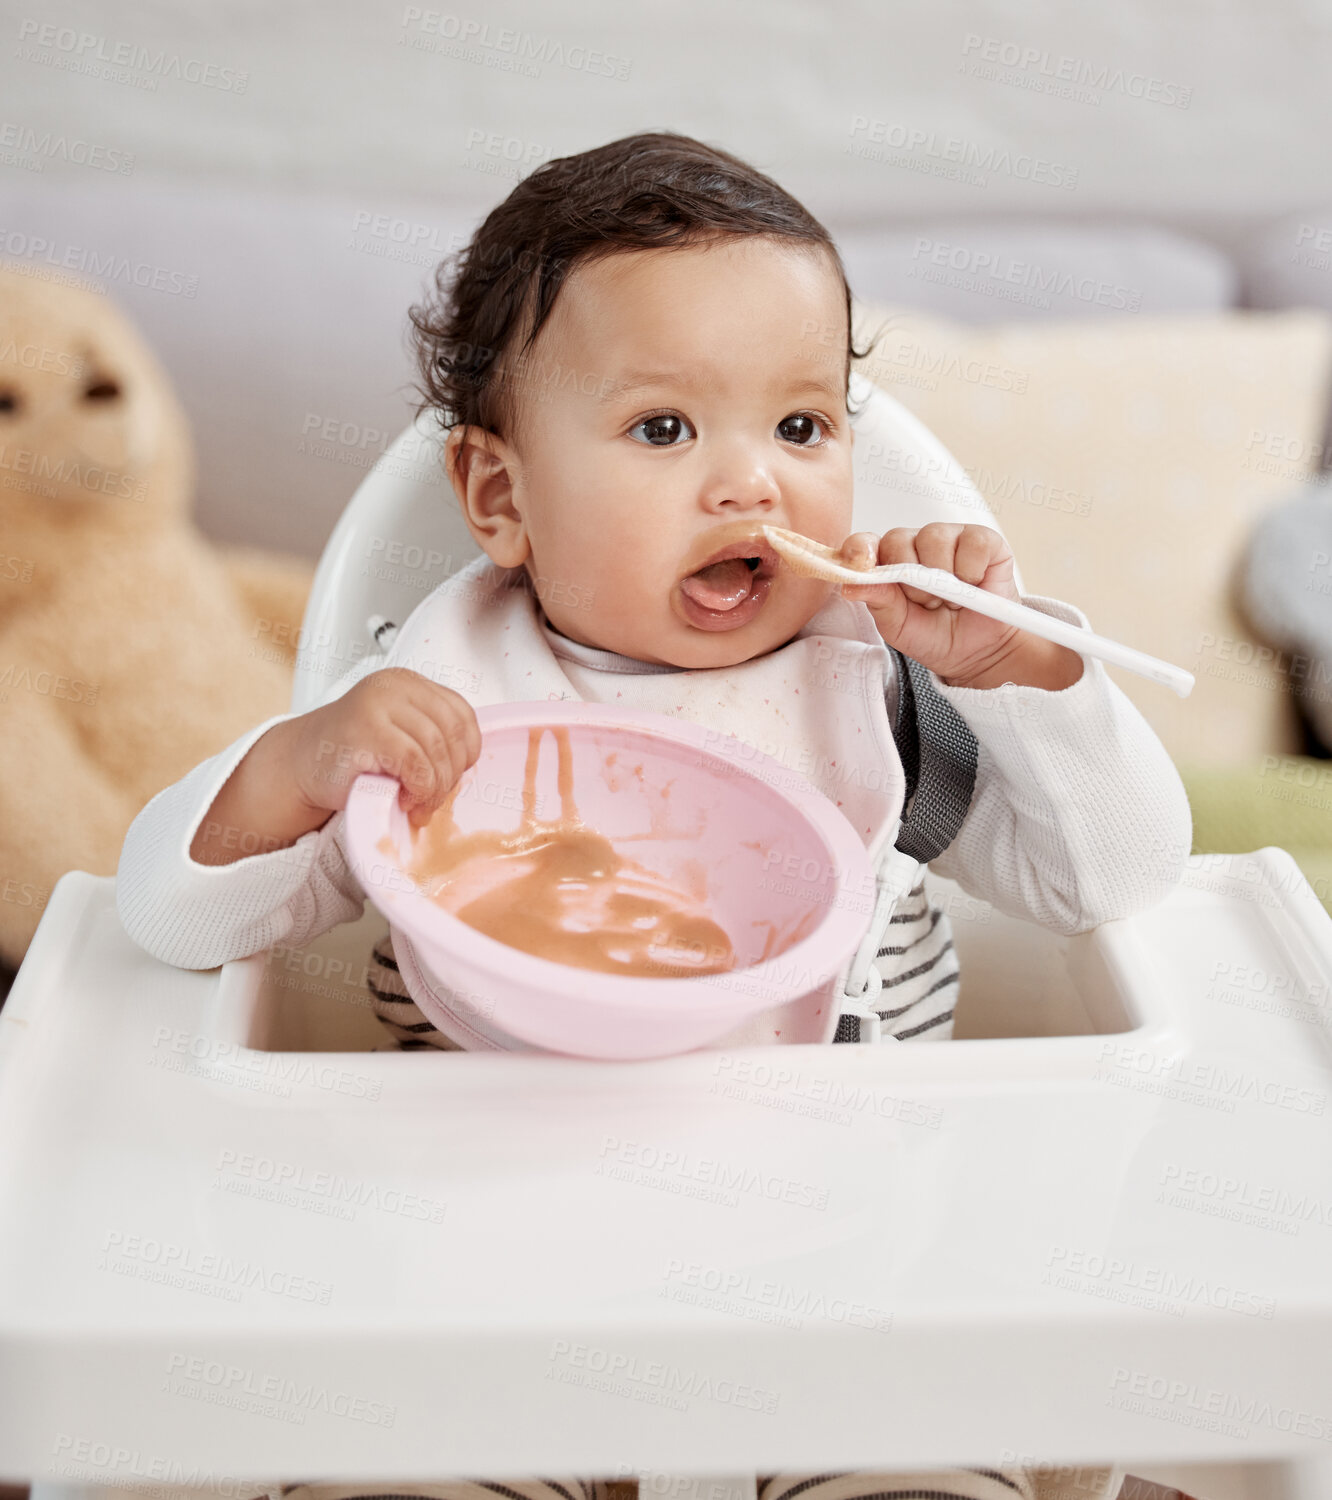 Buy stock photo Shot of a baby eating a meal at home